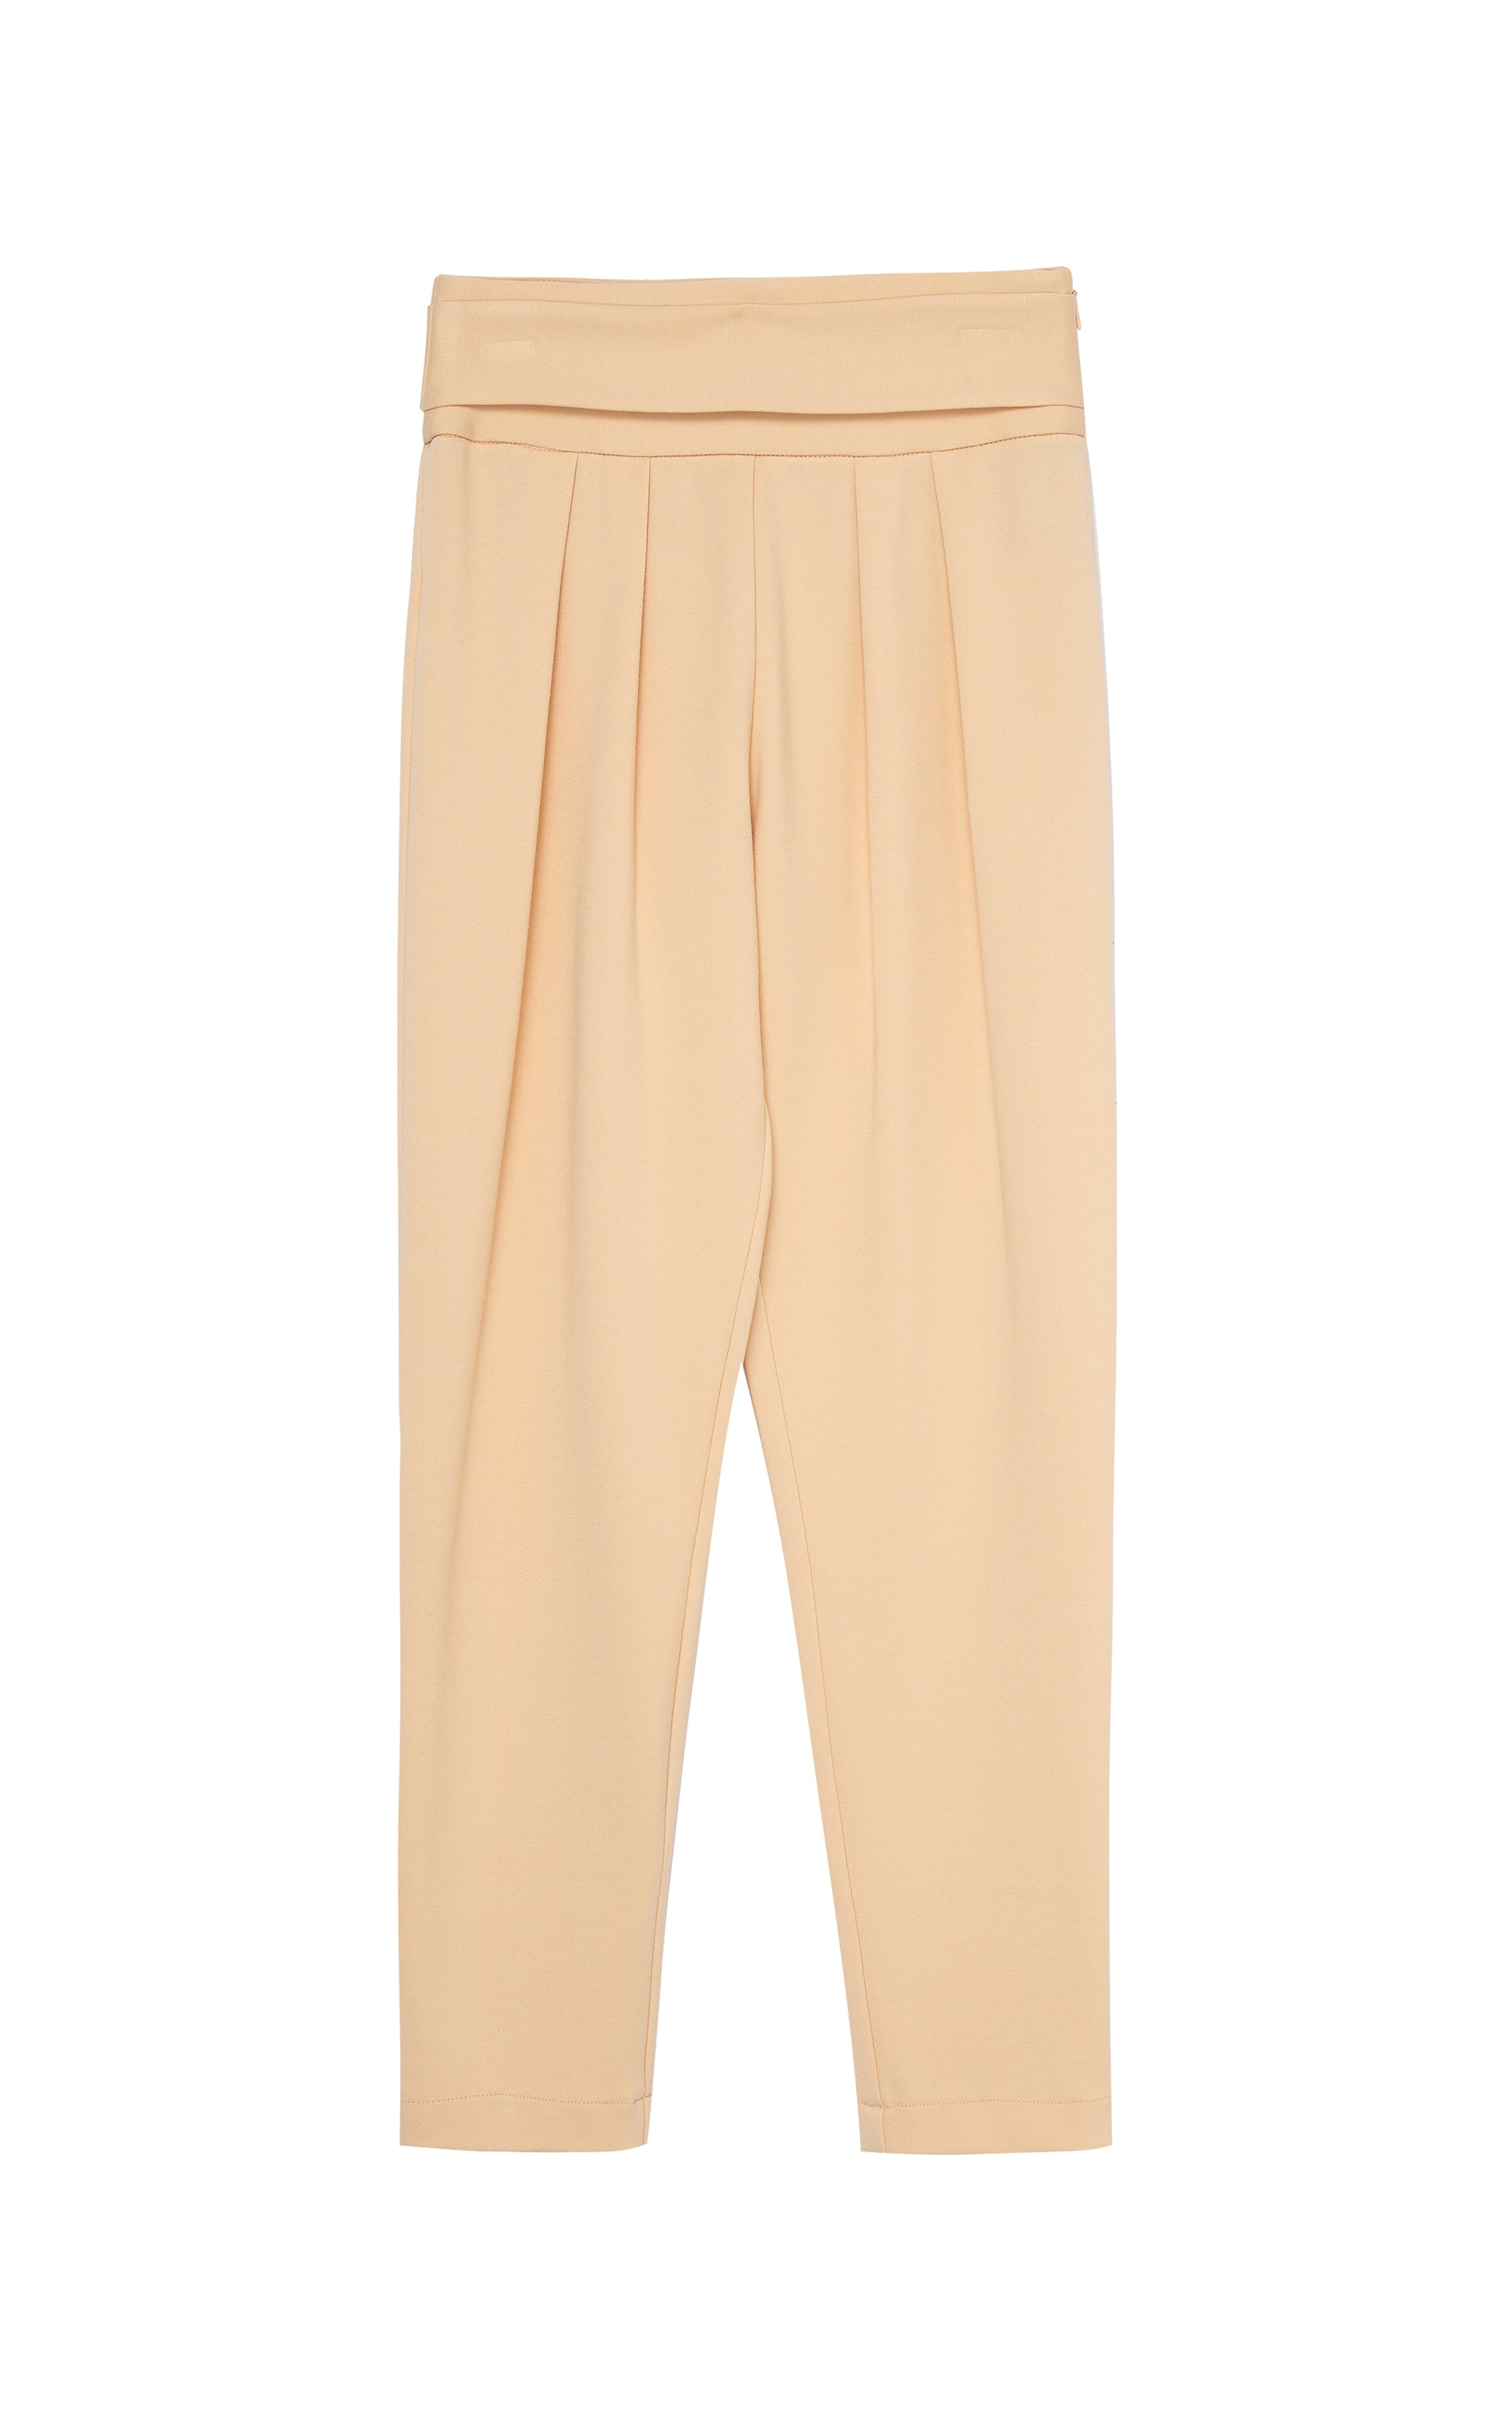 Front view of high waisted khaki fabric pant